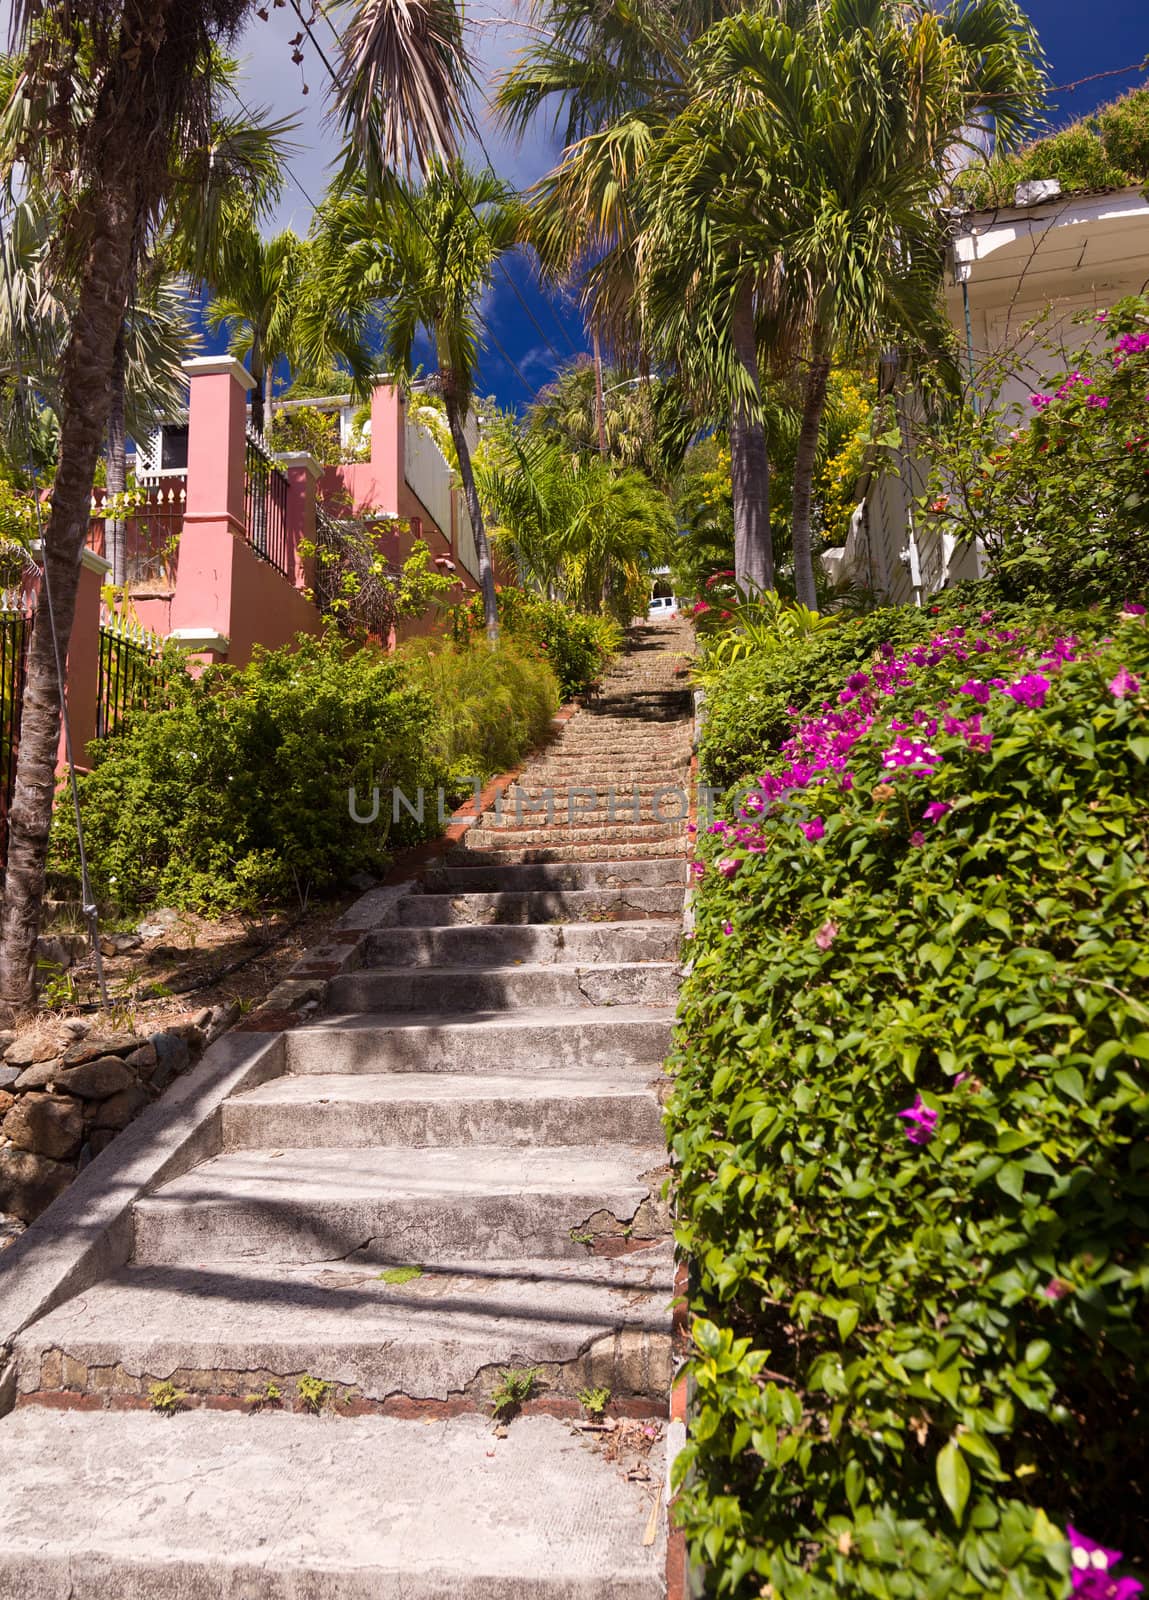 Steep 99 steps in St Thomas by steheap